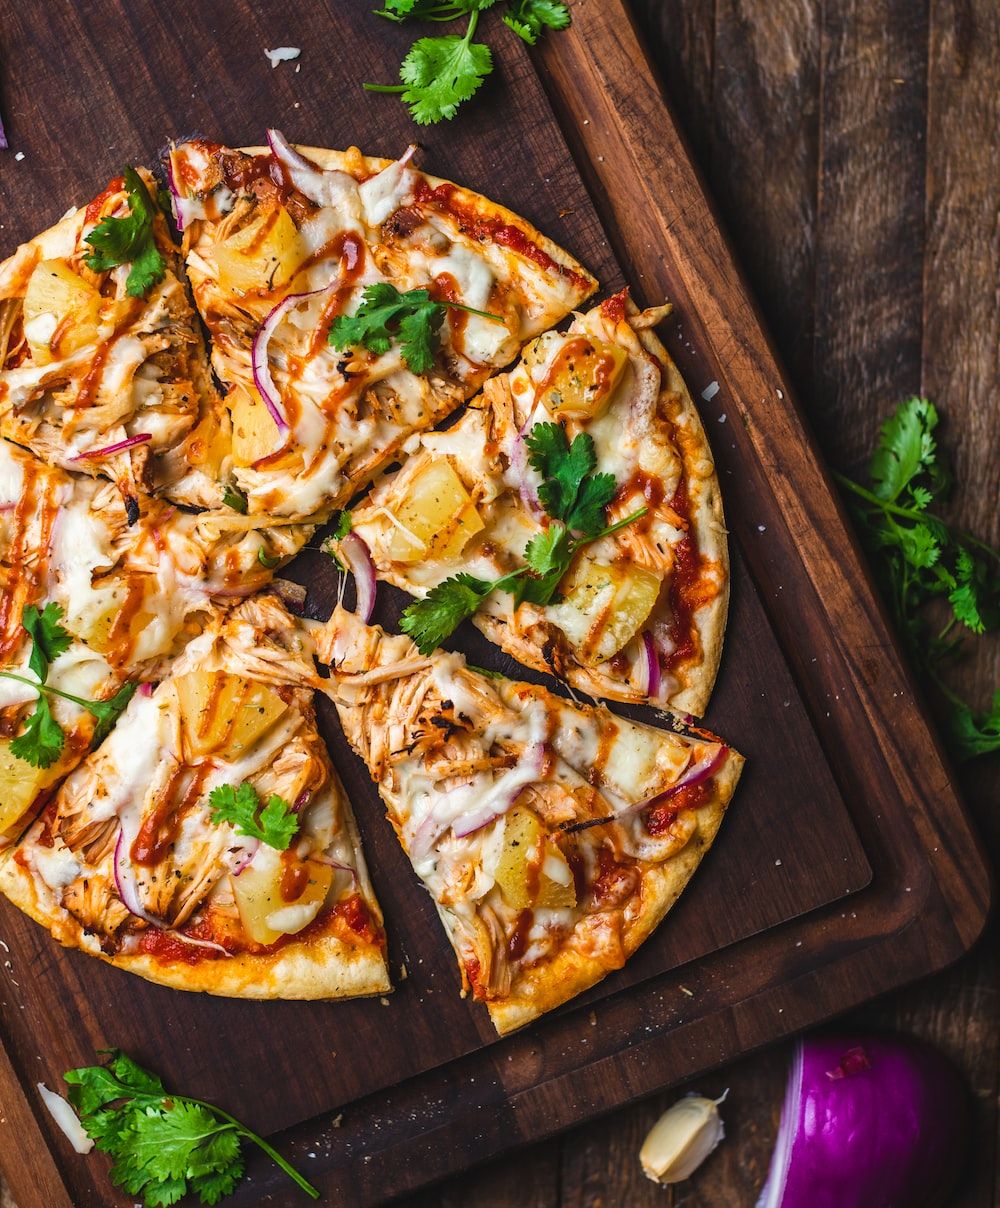 A pizza with chicken, pineapple, and red onions on a wooden cutting board. - Pizza